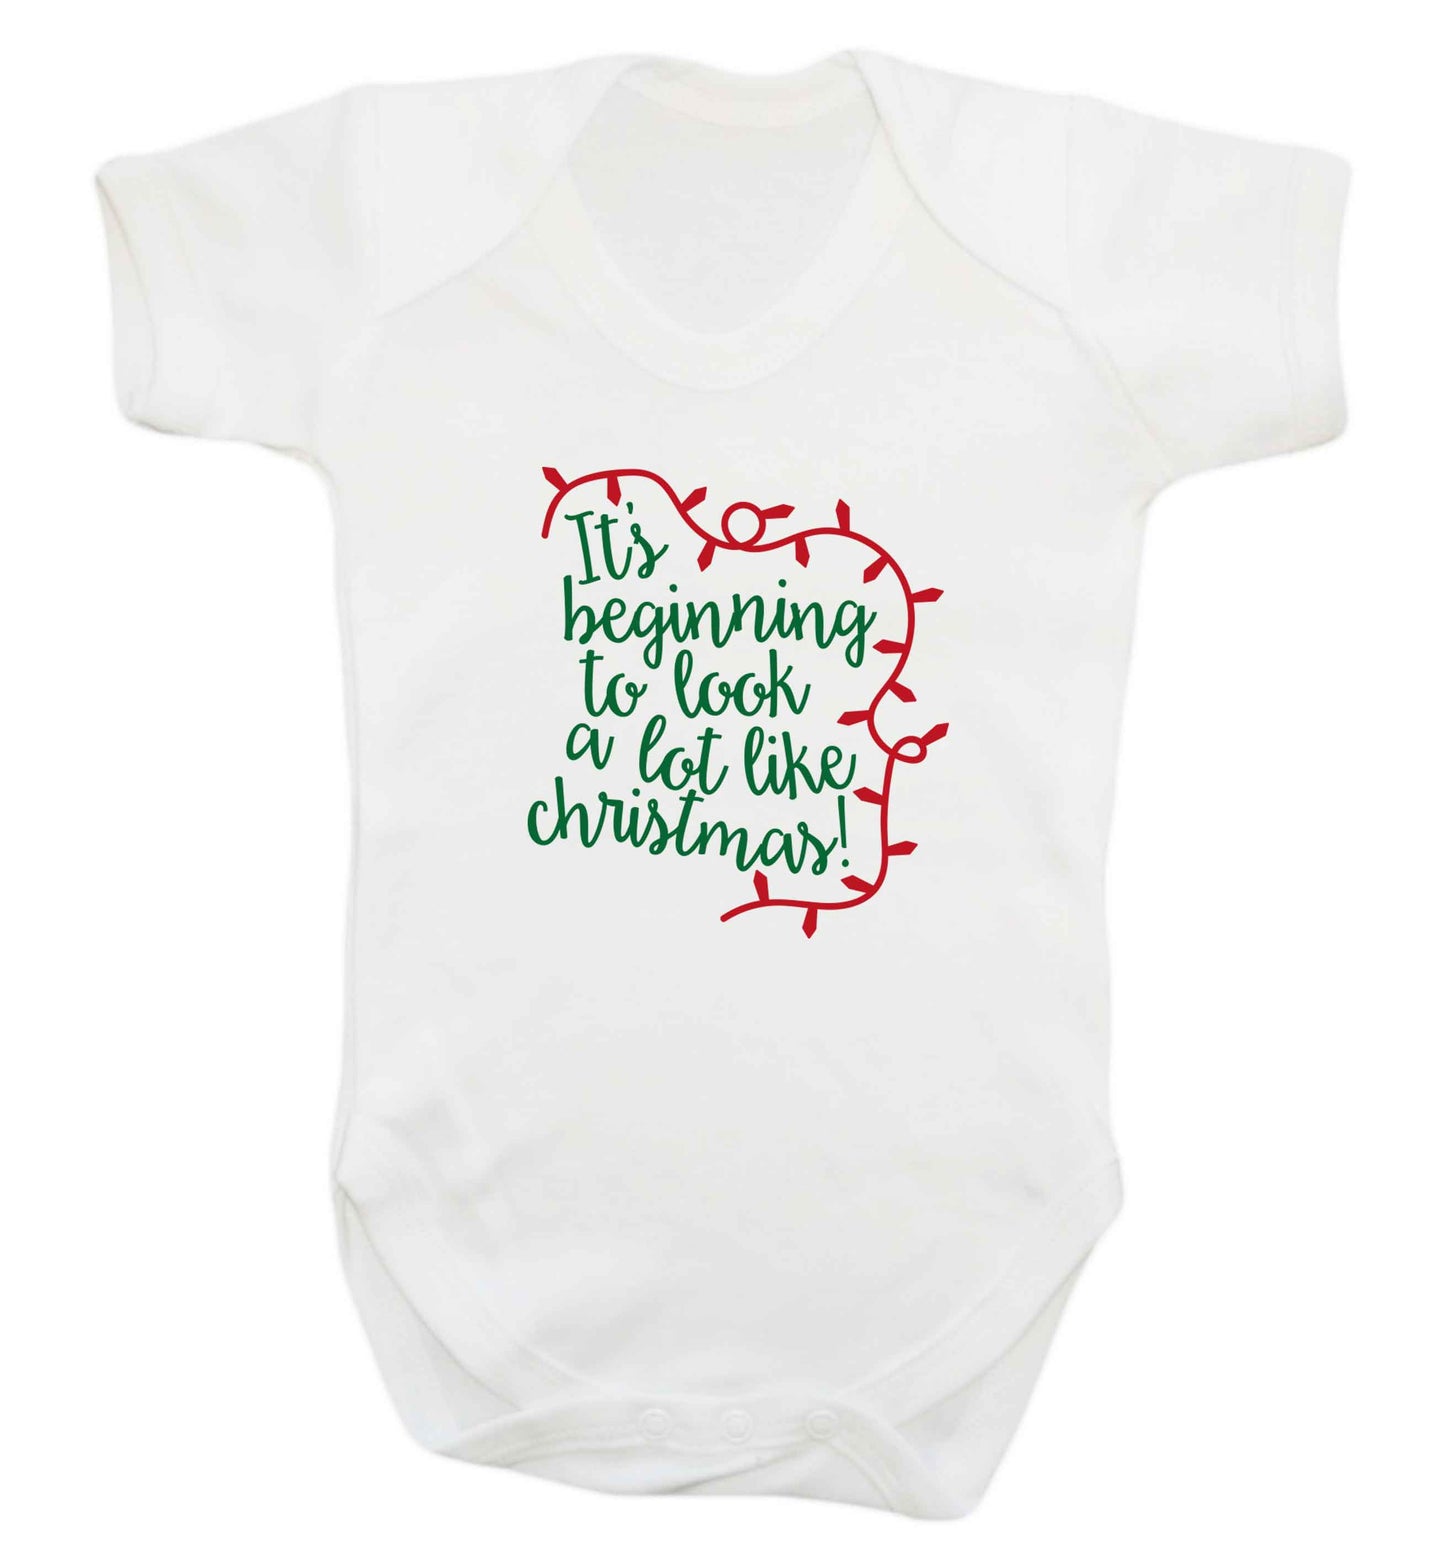 It's beginning to look a lot like Christmas baby vest white 18-24 months